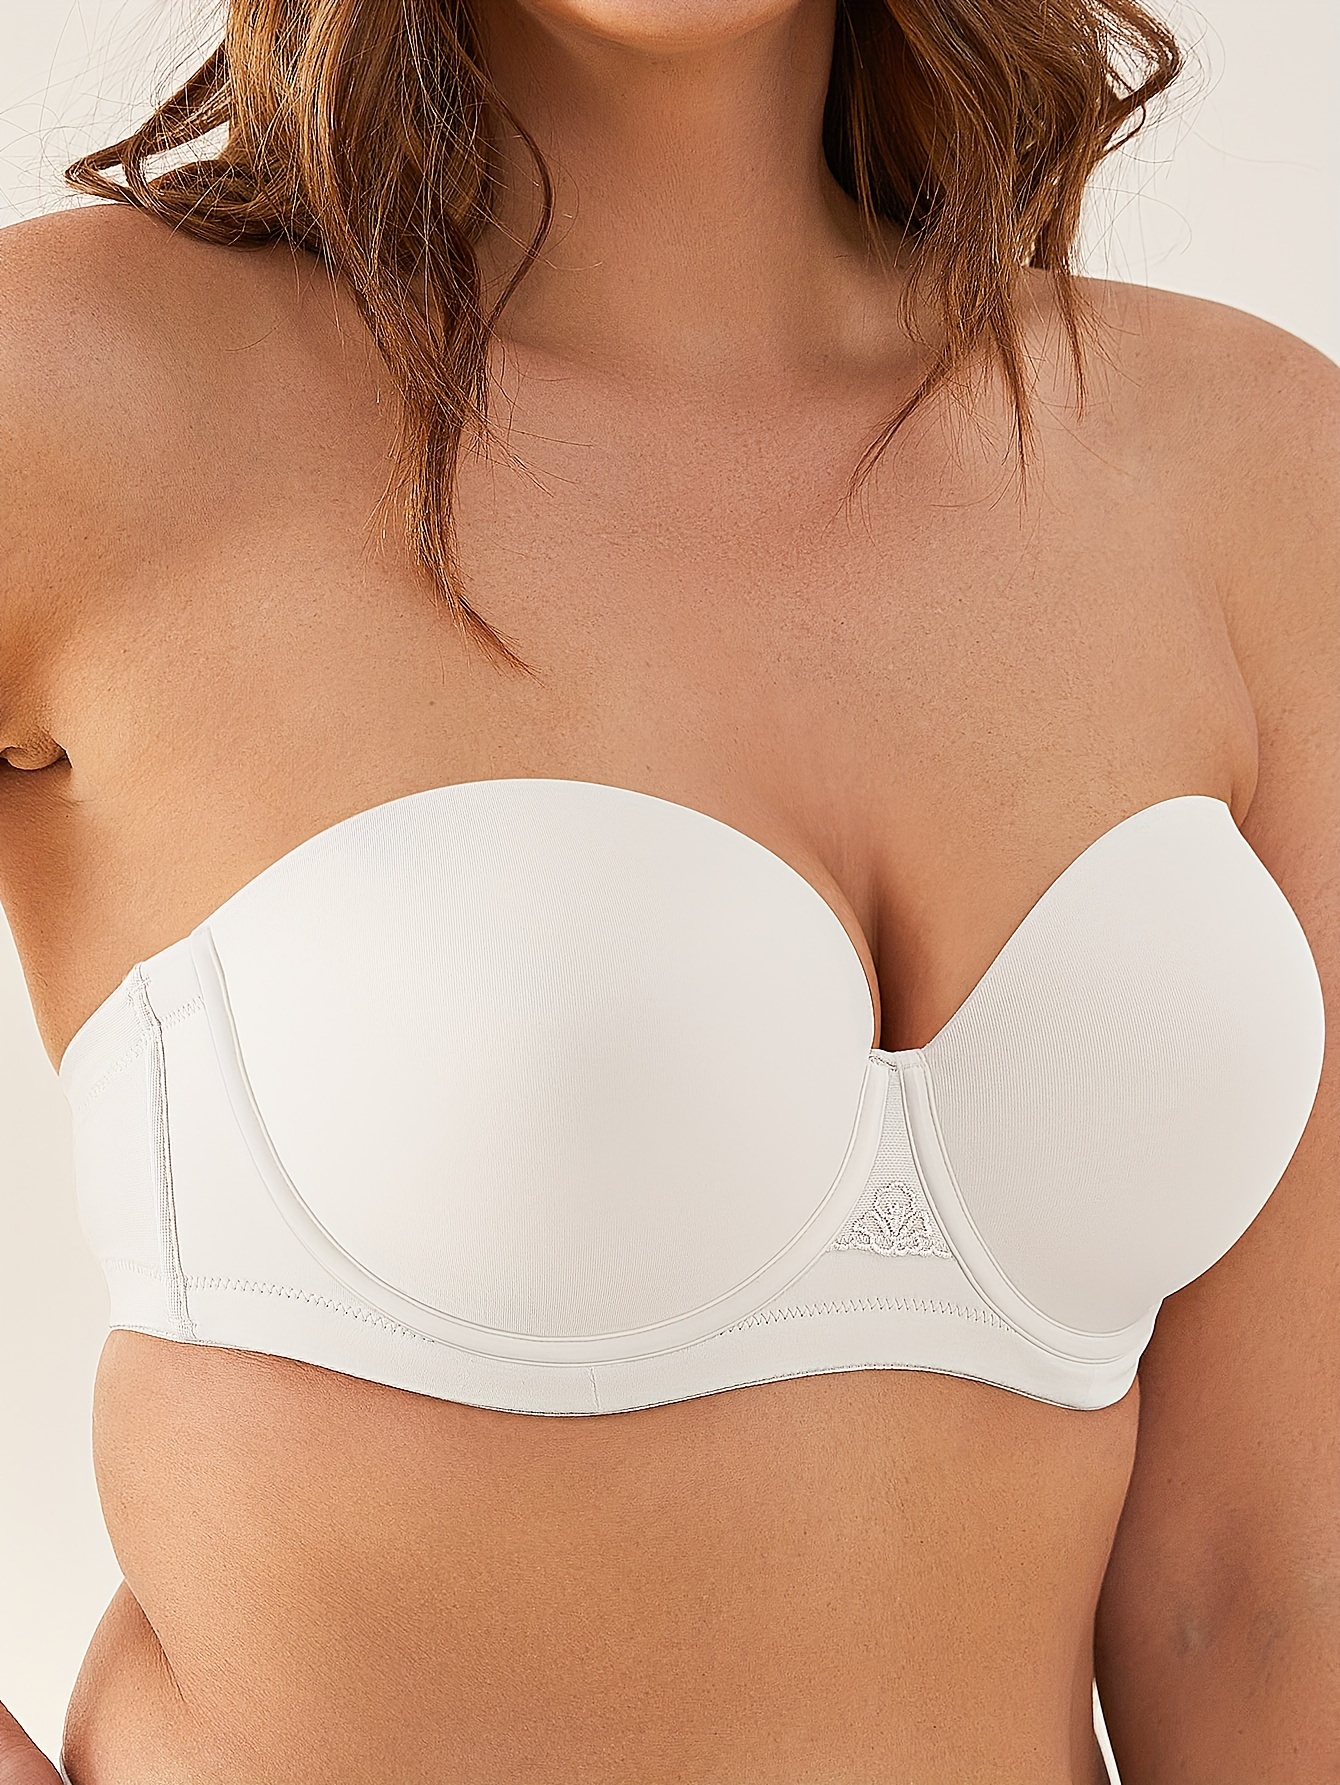 Deyllo Women's Strapless Push Up Full Cup Plus Size Underwire Padded Bra,  White 40D